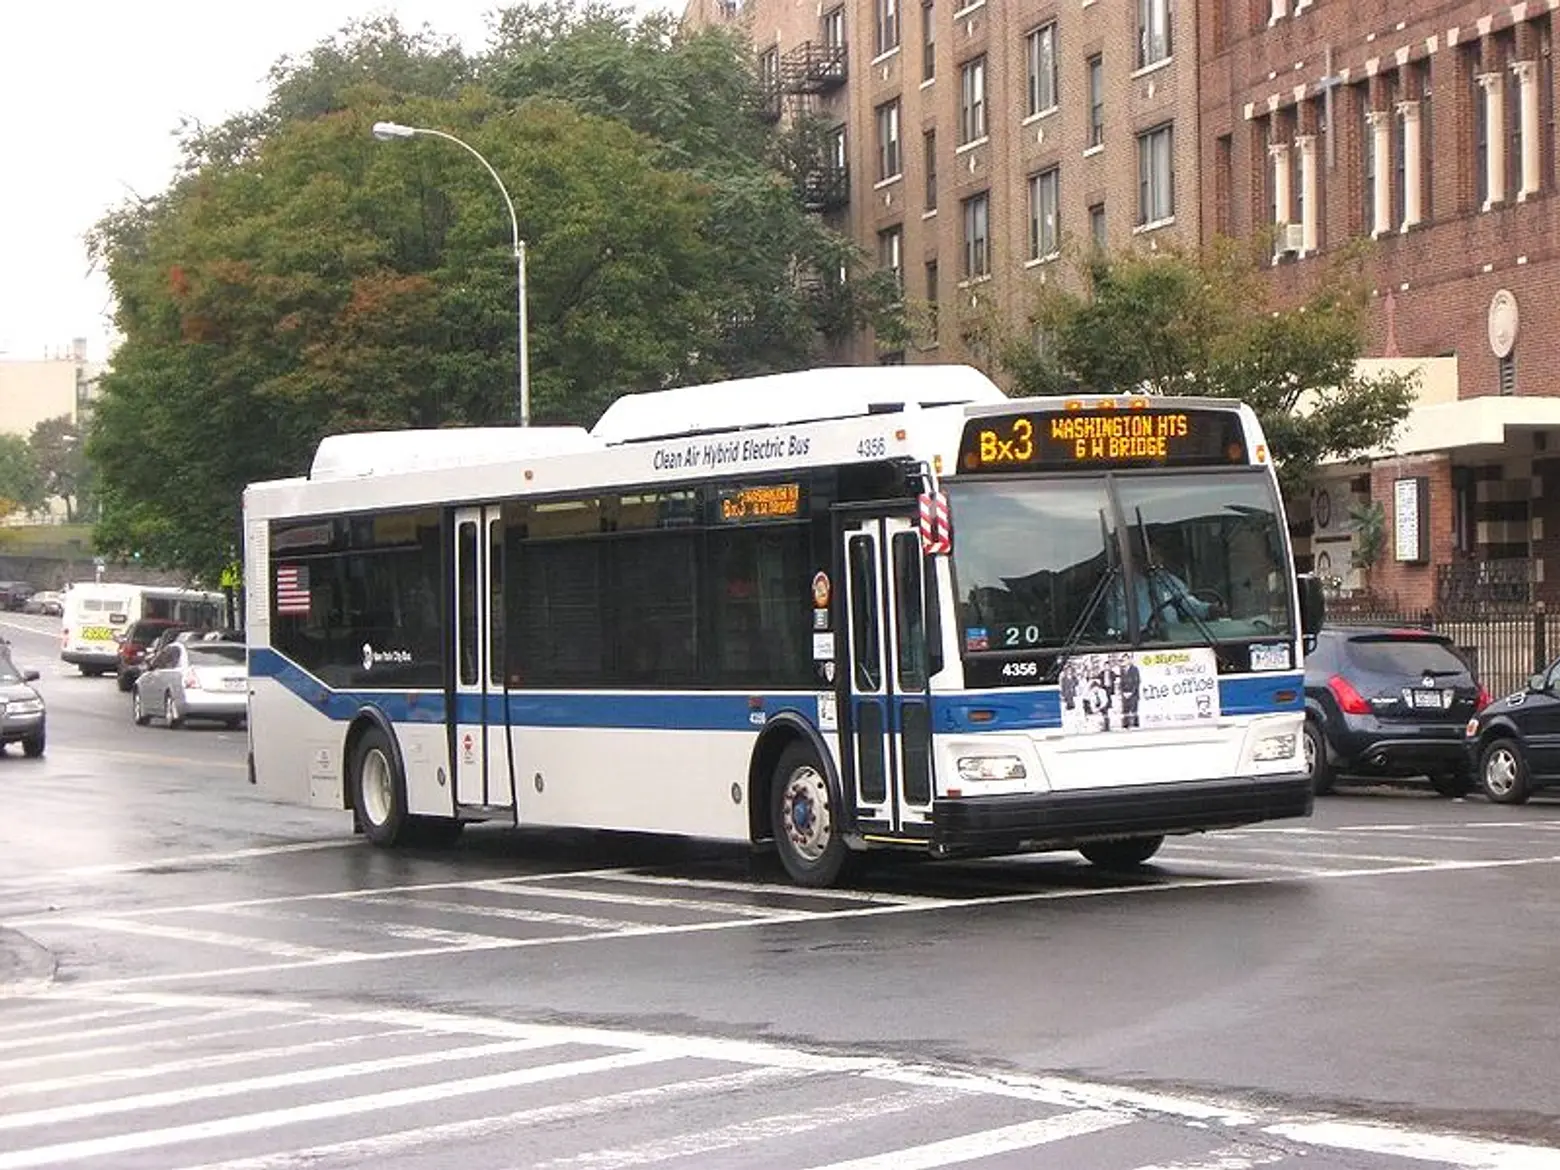 400 bus stops in the Bronx to be cut as part of major network redesign